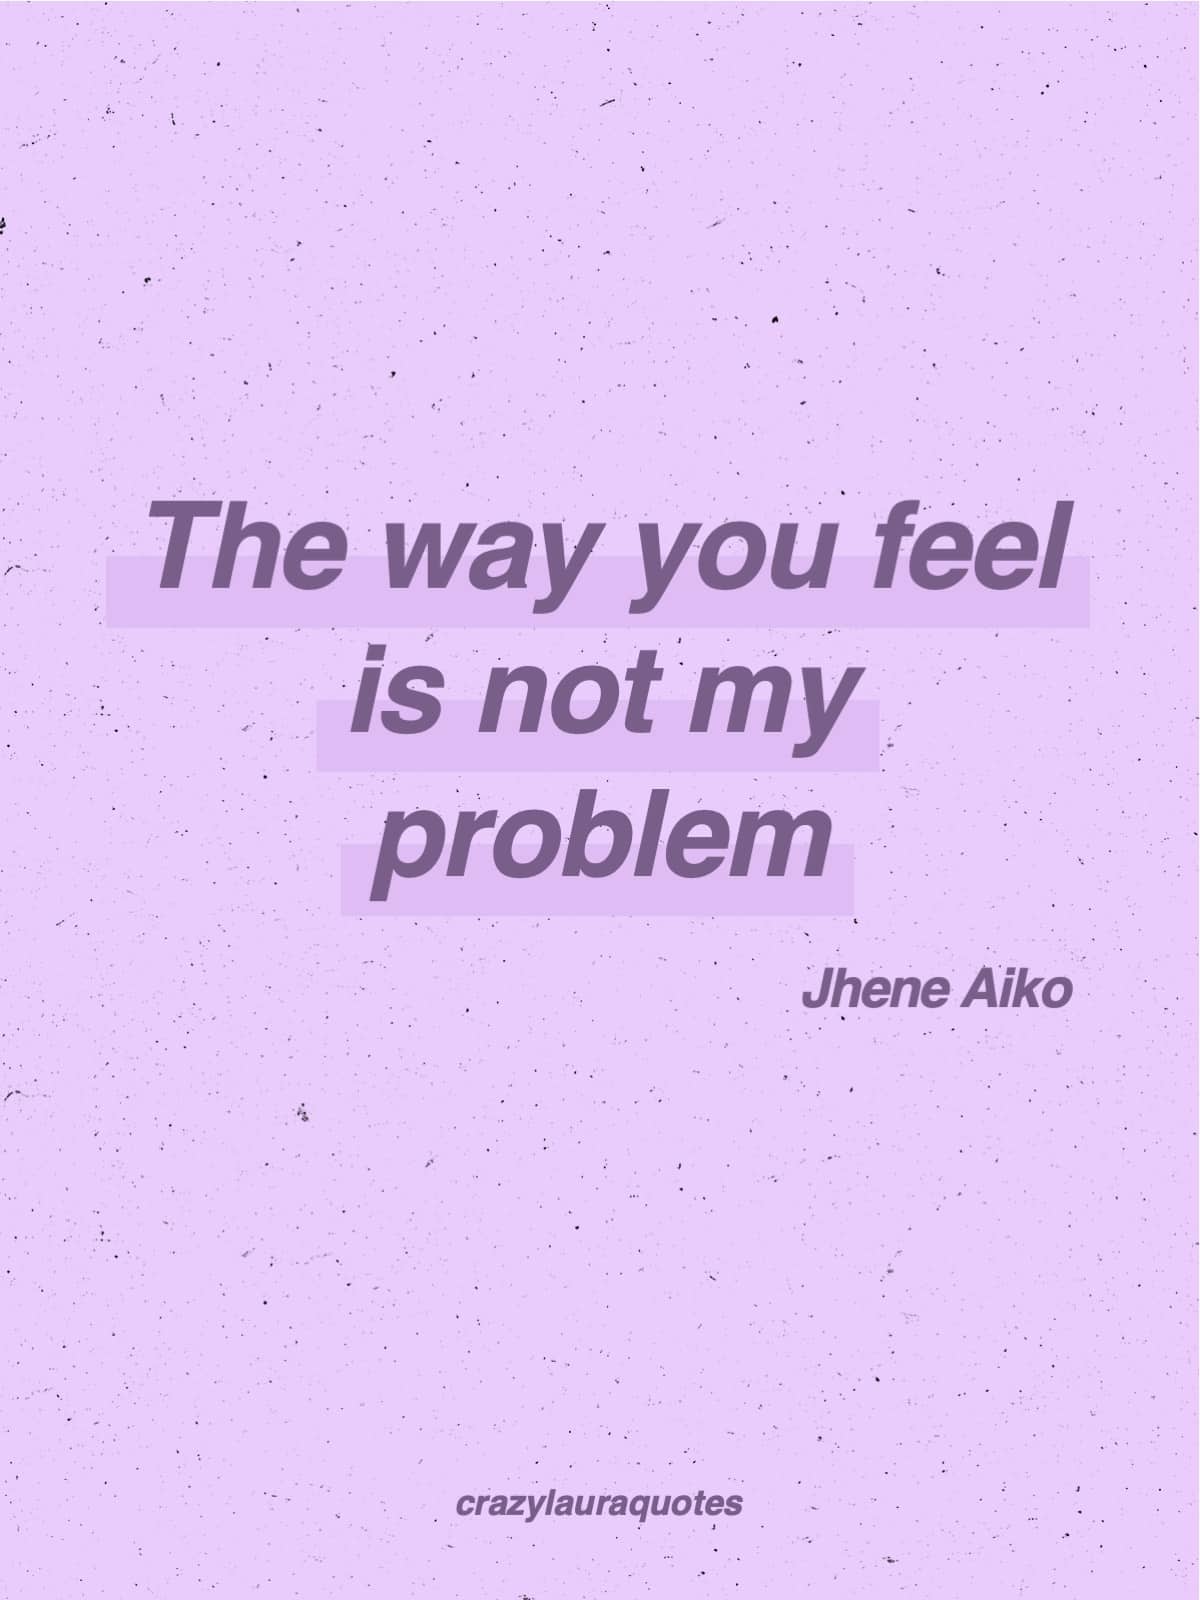 do not mind other people jhene